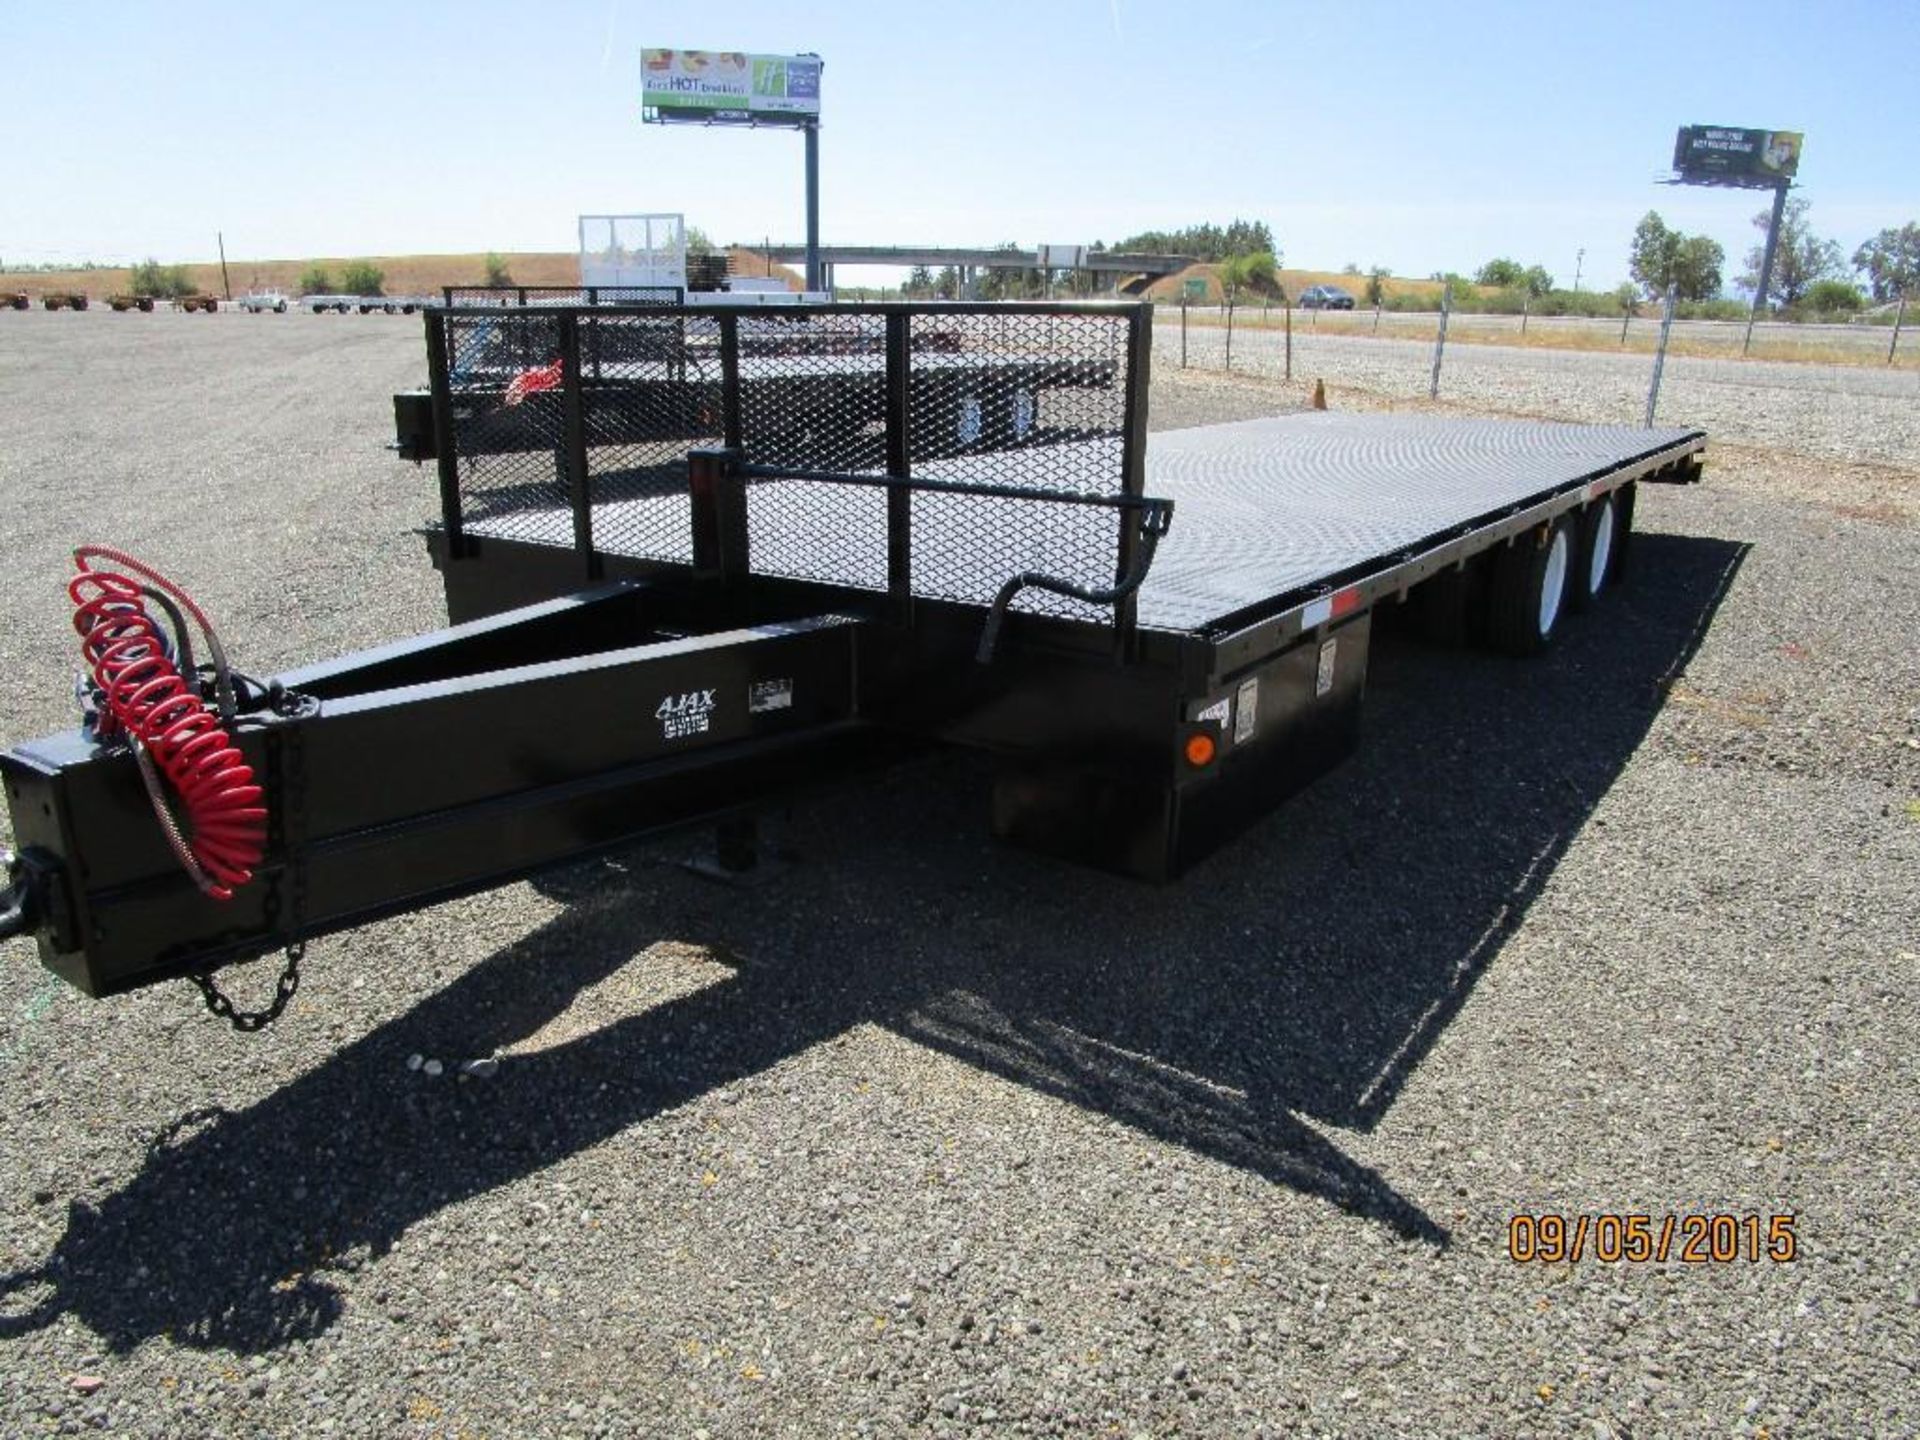 24'x102" Flatbed Trailer  VIN# 1B9H24201B1031523  Plate# 4FD9526  GVWR - 24,000 lbs  Pintle Hitch - Image 2 of 8